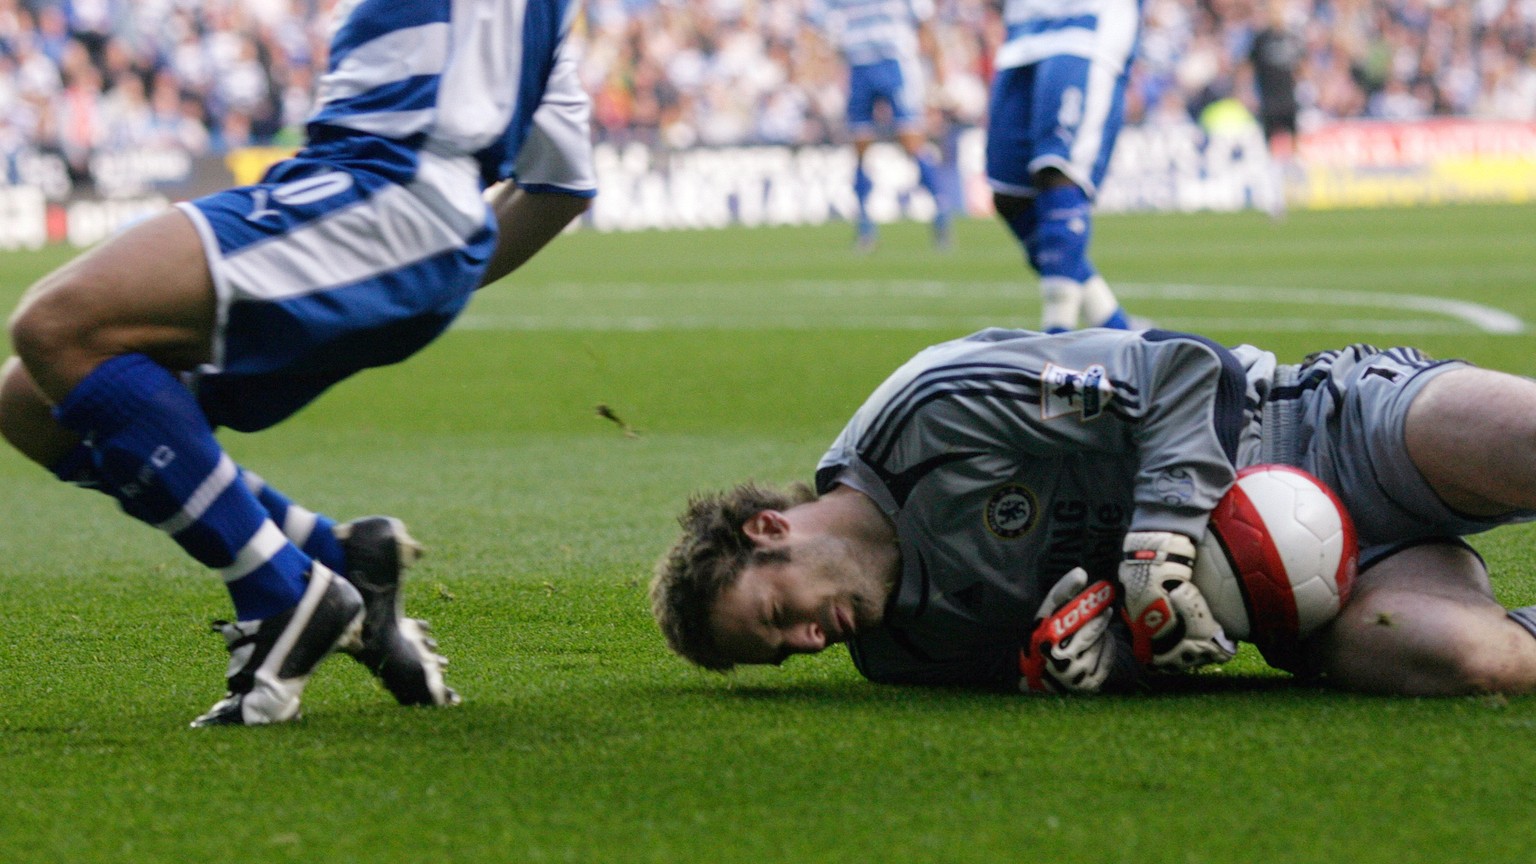 Chelsea&#039;s goalkeeper Petr Cech lies on the ground after a challenge by Reading&#039;s Stephen Hunt (L) in their English Premier League soccer match at the Madejski Stadium in Reading, southern En ...